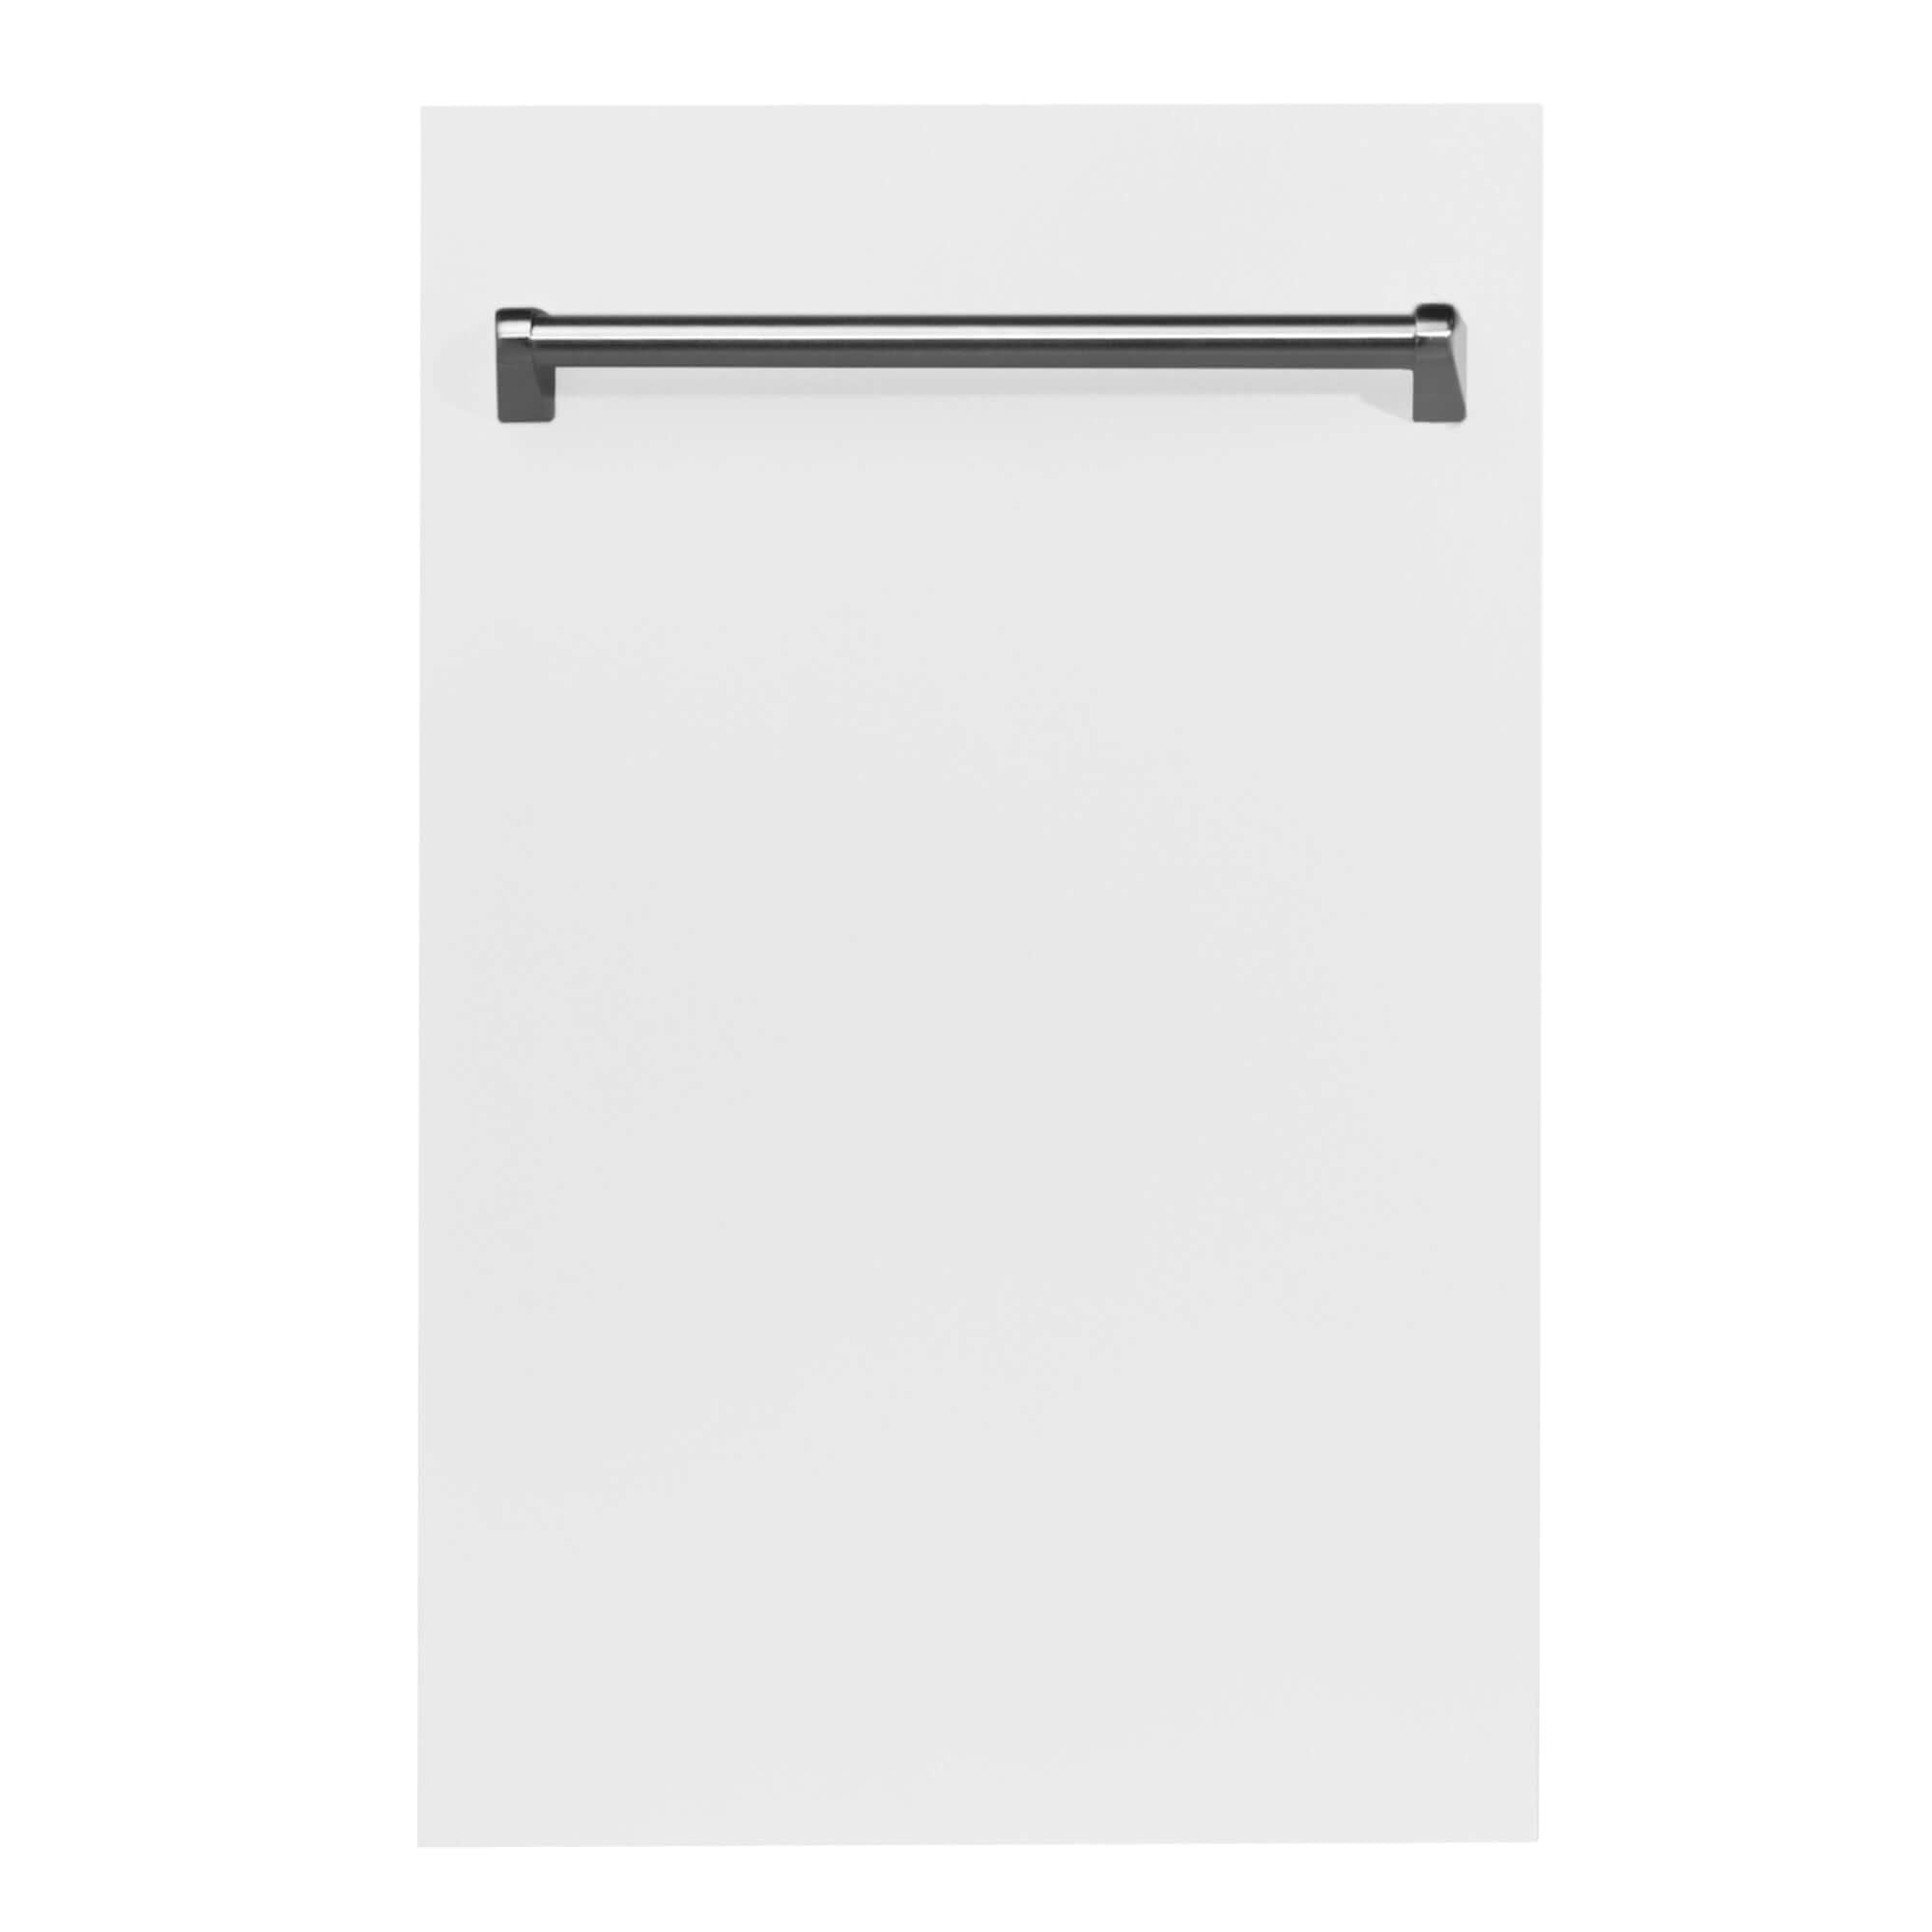 ZLINE 18 in. Compact White Matte Top Control Built-In Dishwasher with Stainless Steel Tub and Traditional Style Handle, 52dBa (DW-WM-18)